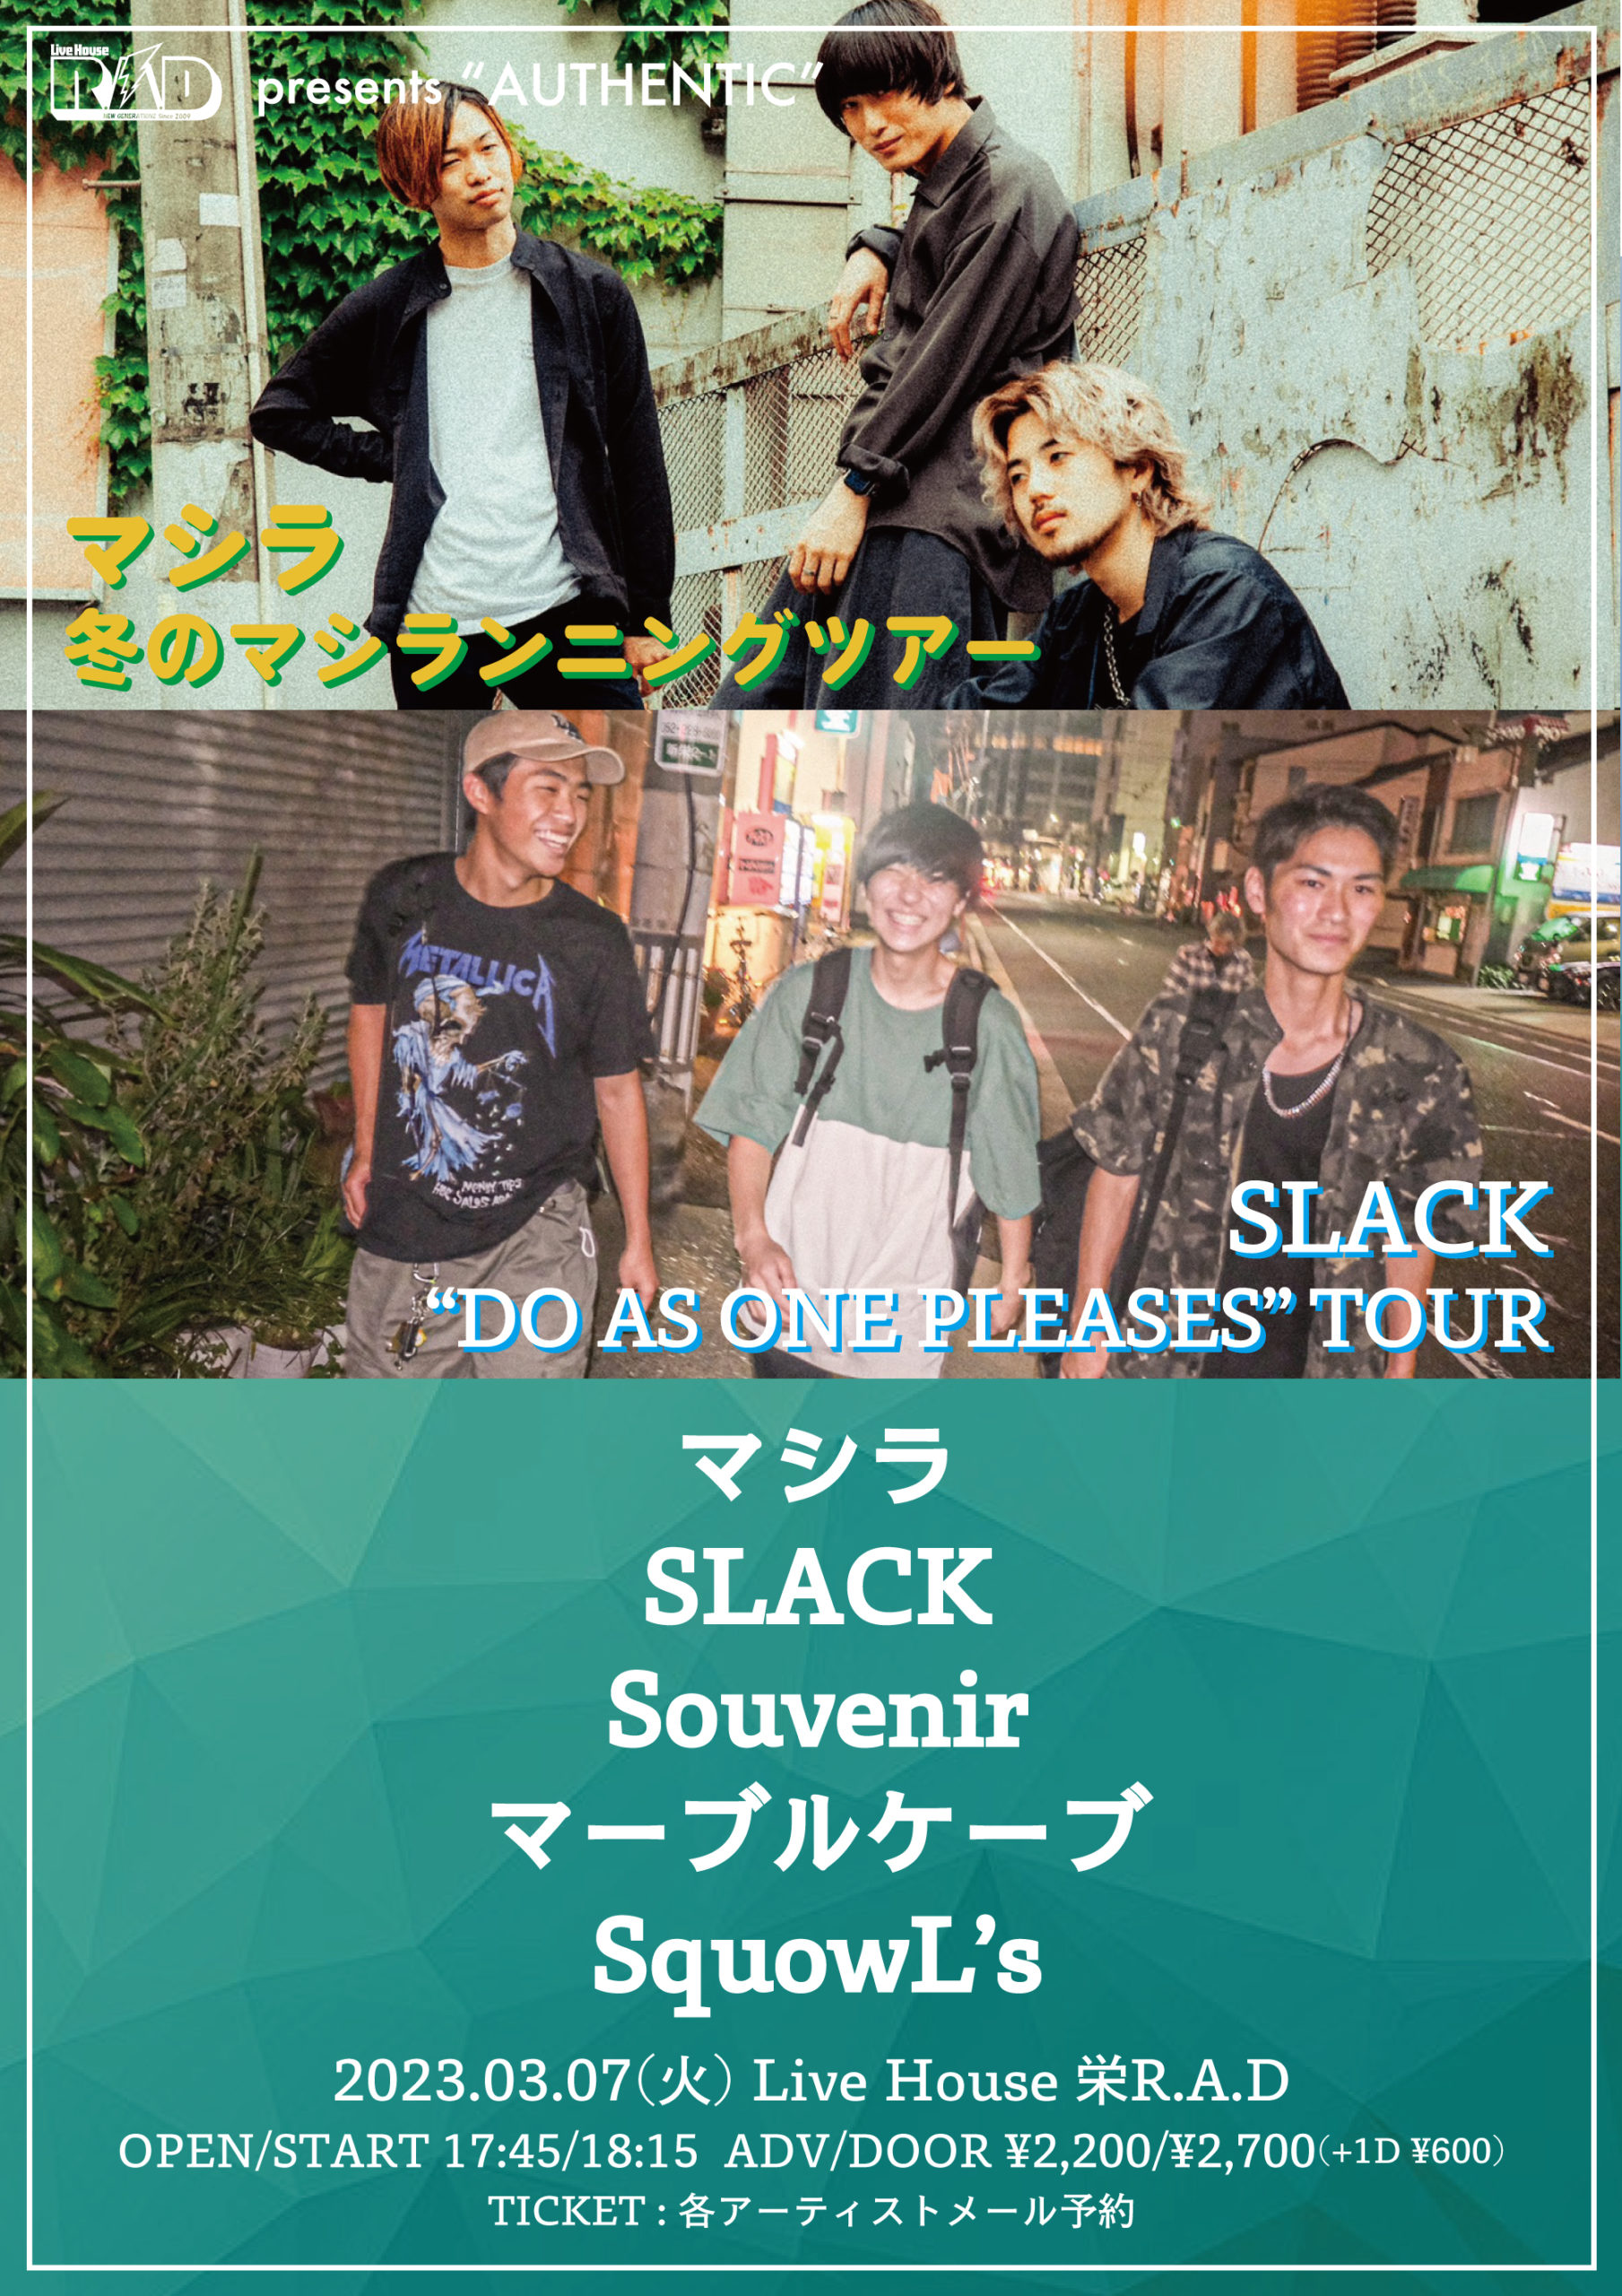 R.A.D presents "AUTHENTIC" マシラ 冬のマシラニングツアー SLACK “DO AS ONE PLEASES” TOUR